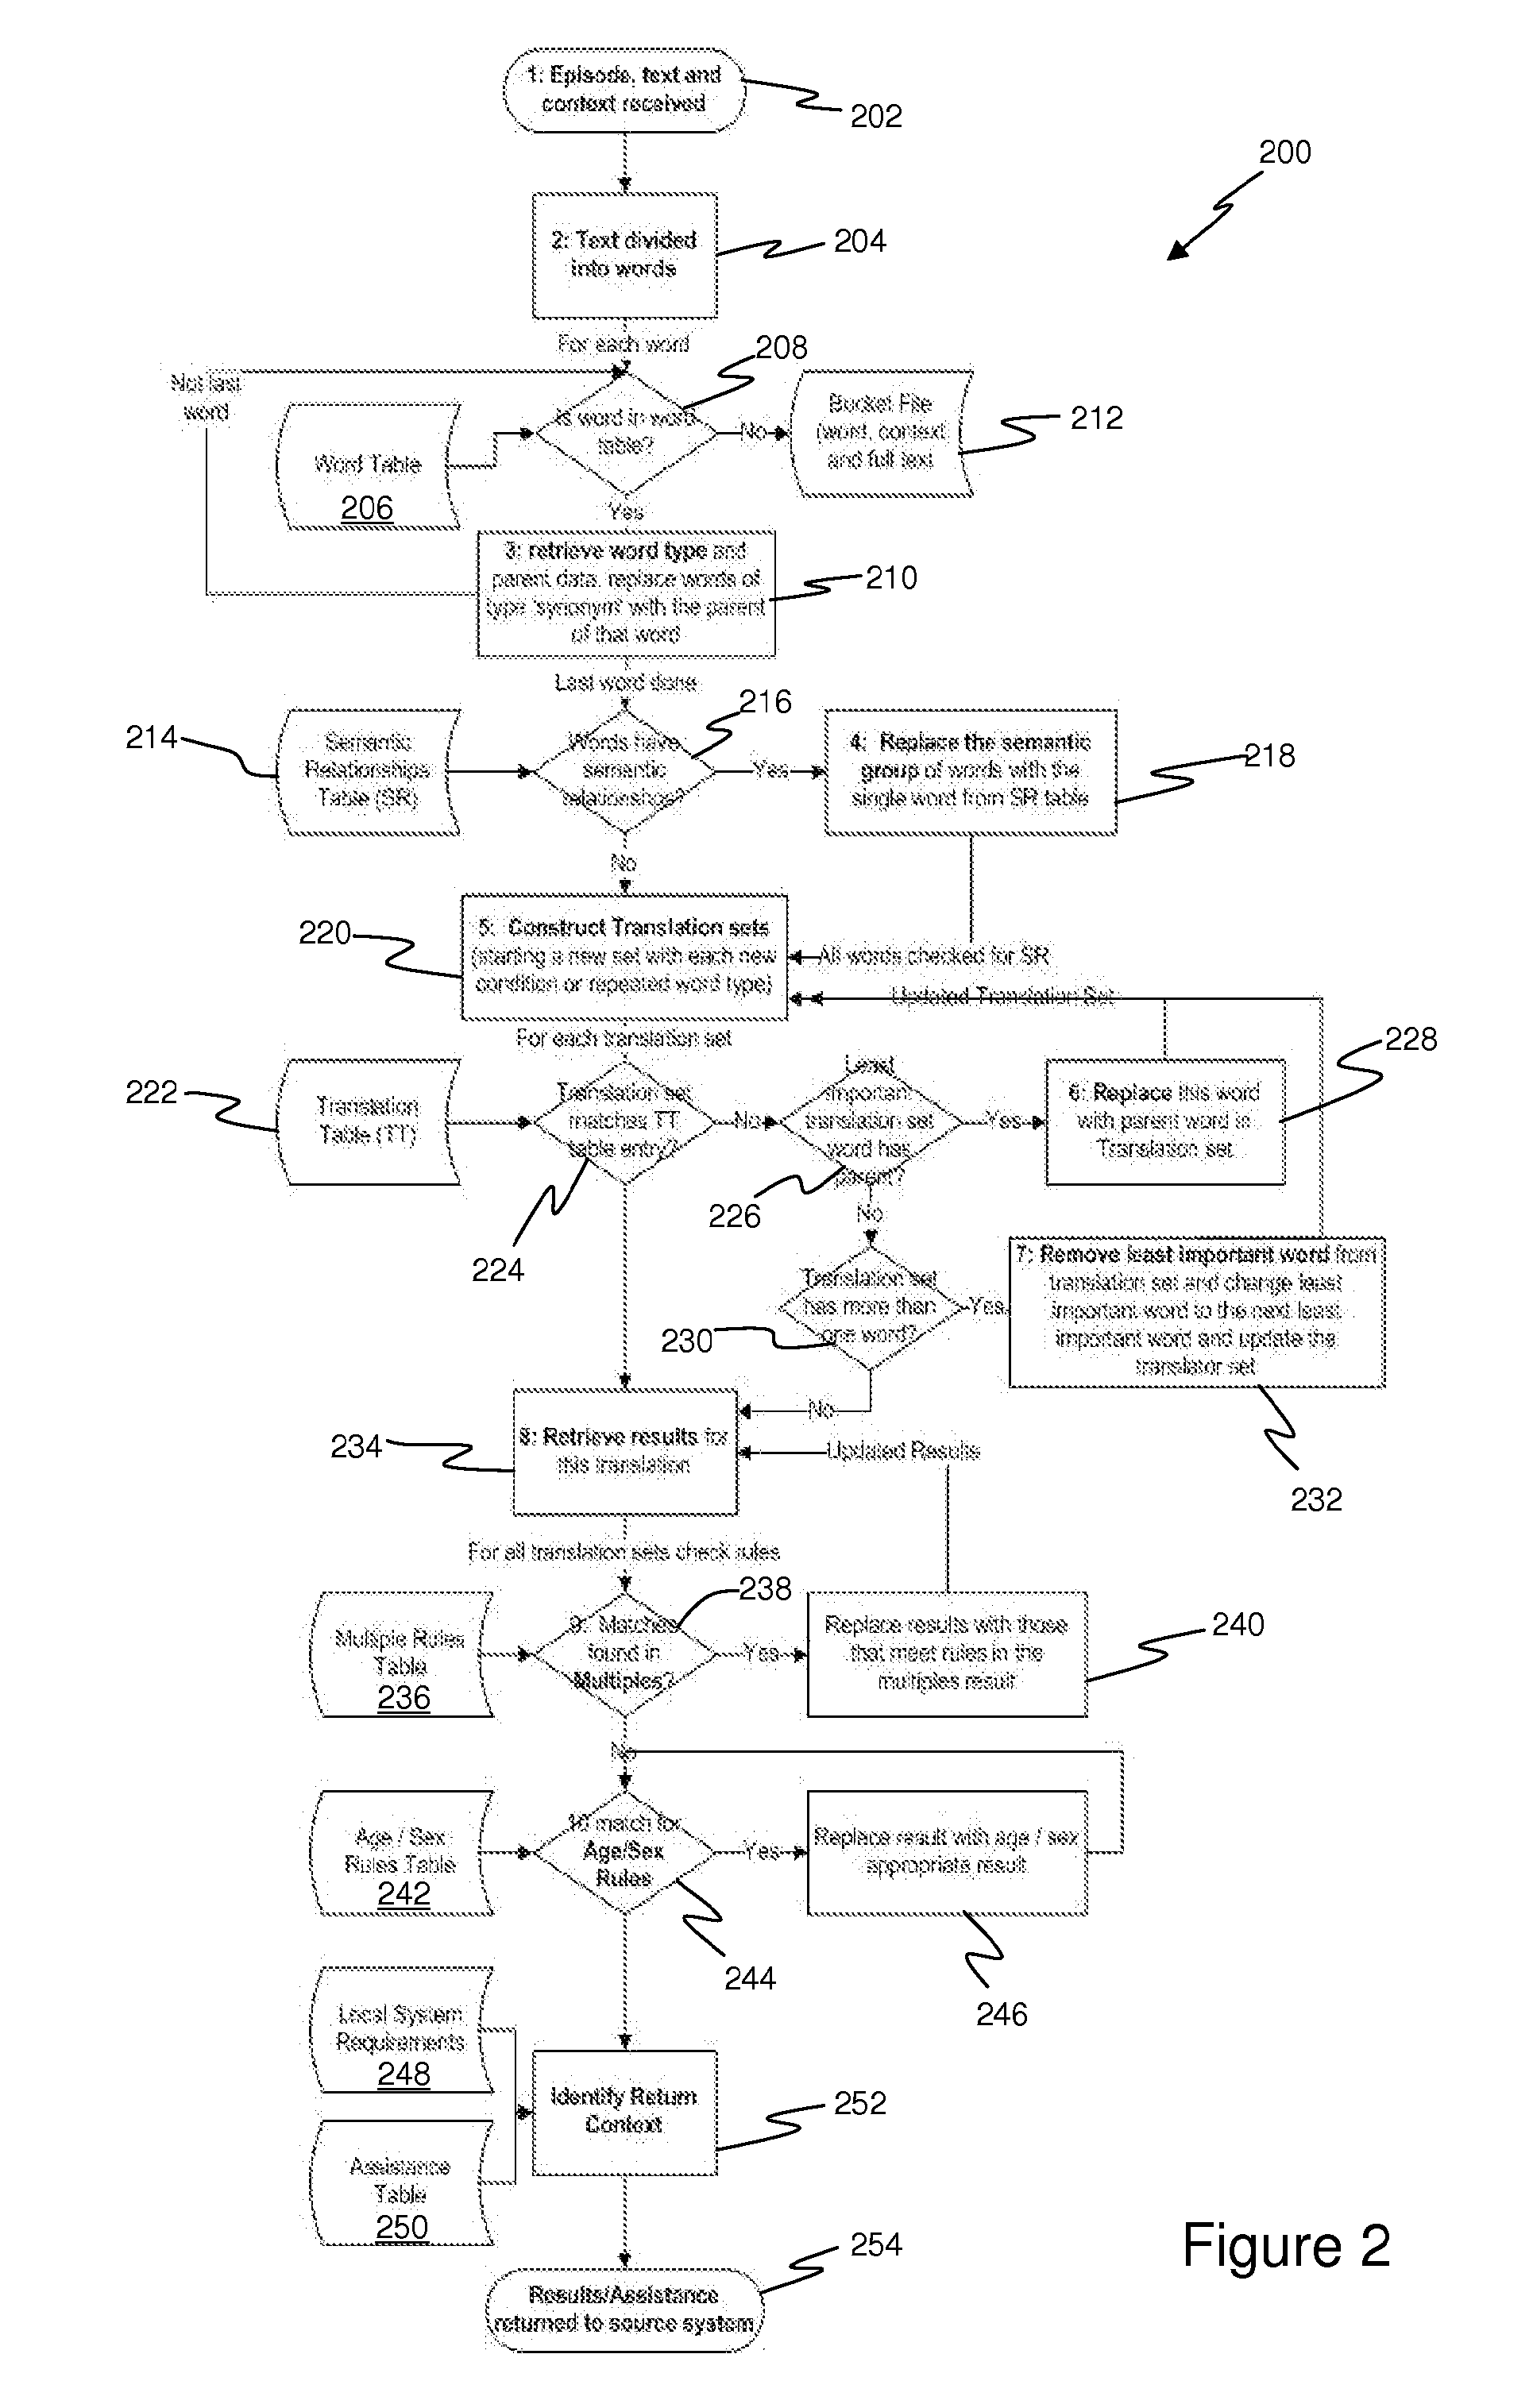 Method and System for Classification of Clinical Information